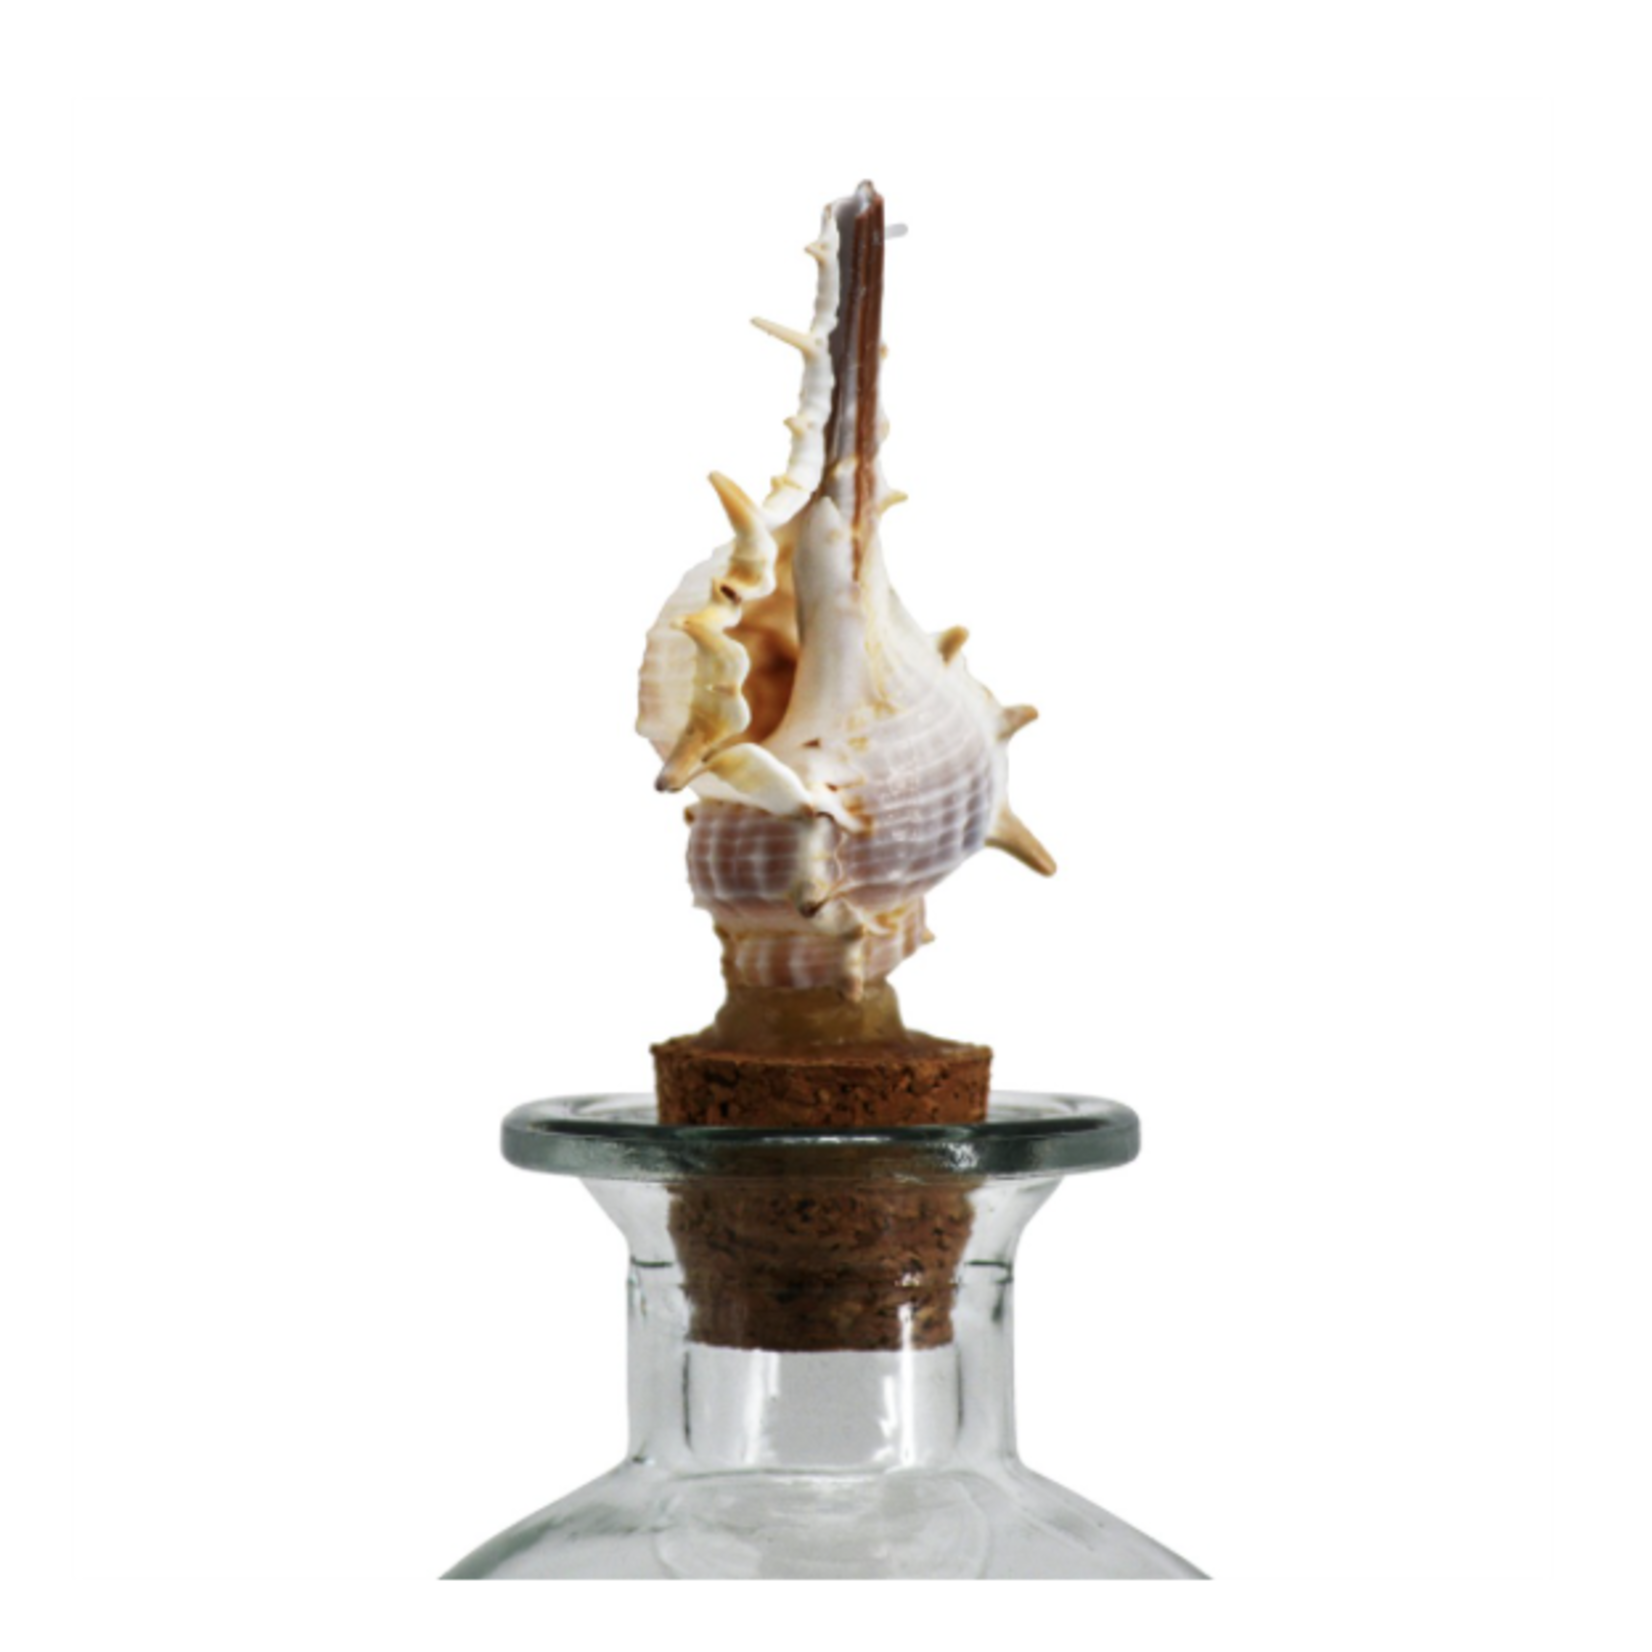 40% off was $11 now $6.59. 9”H X 3.5” NAUTICAL SAND BUD VASES WITH SAND AND SHELLS INCLUDED